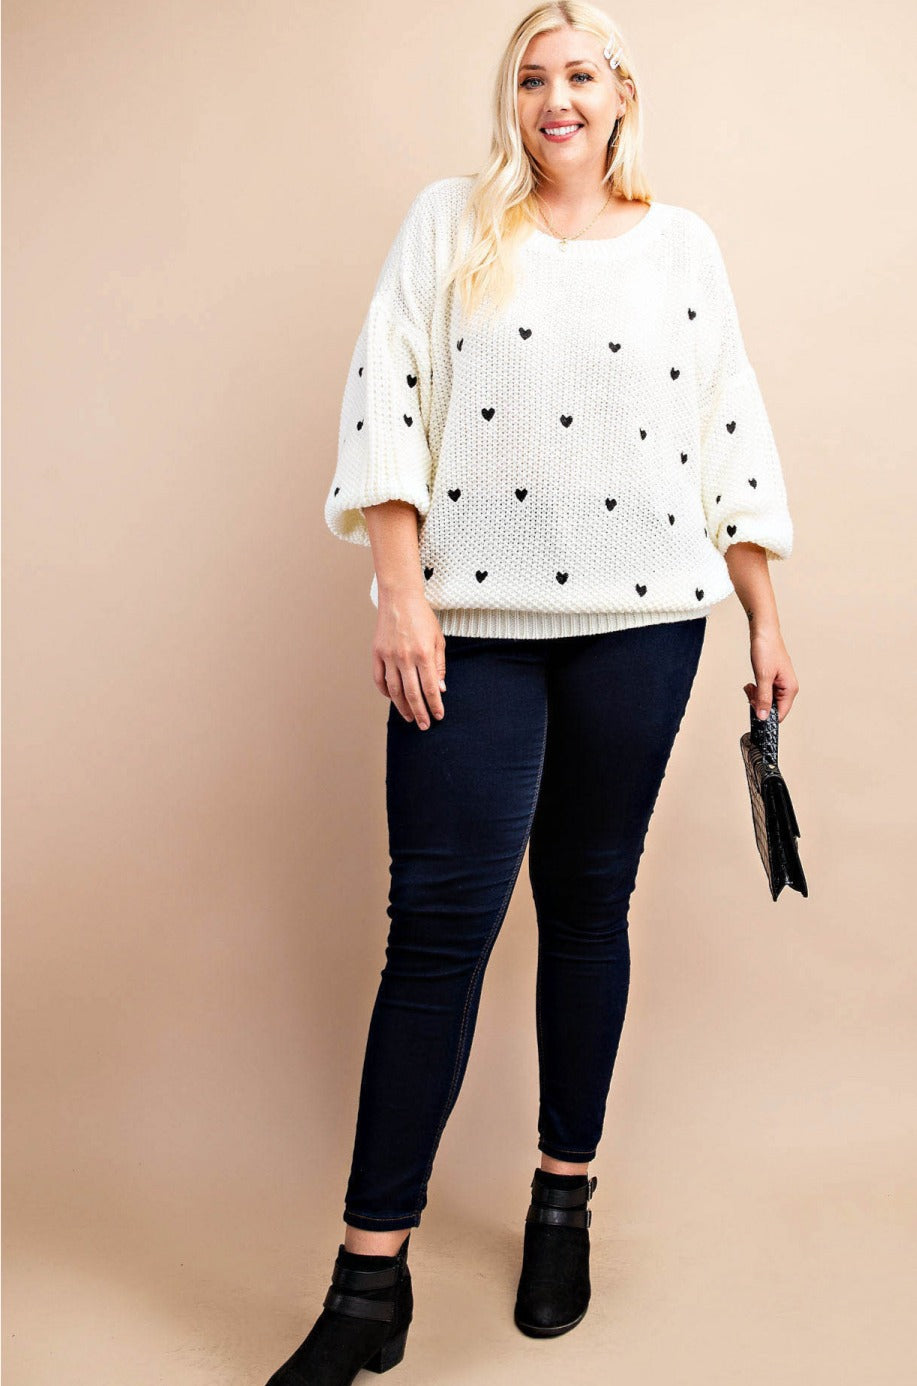 Queen of Hearts Ivory Sweater (Plus)